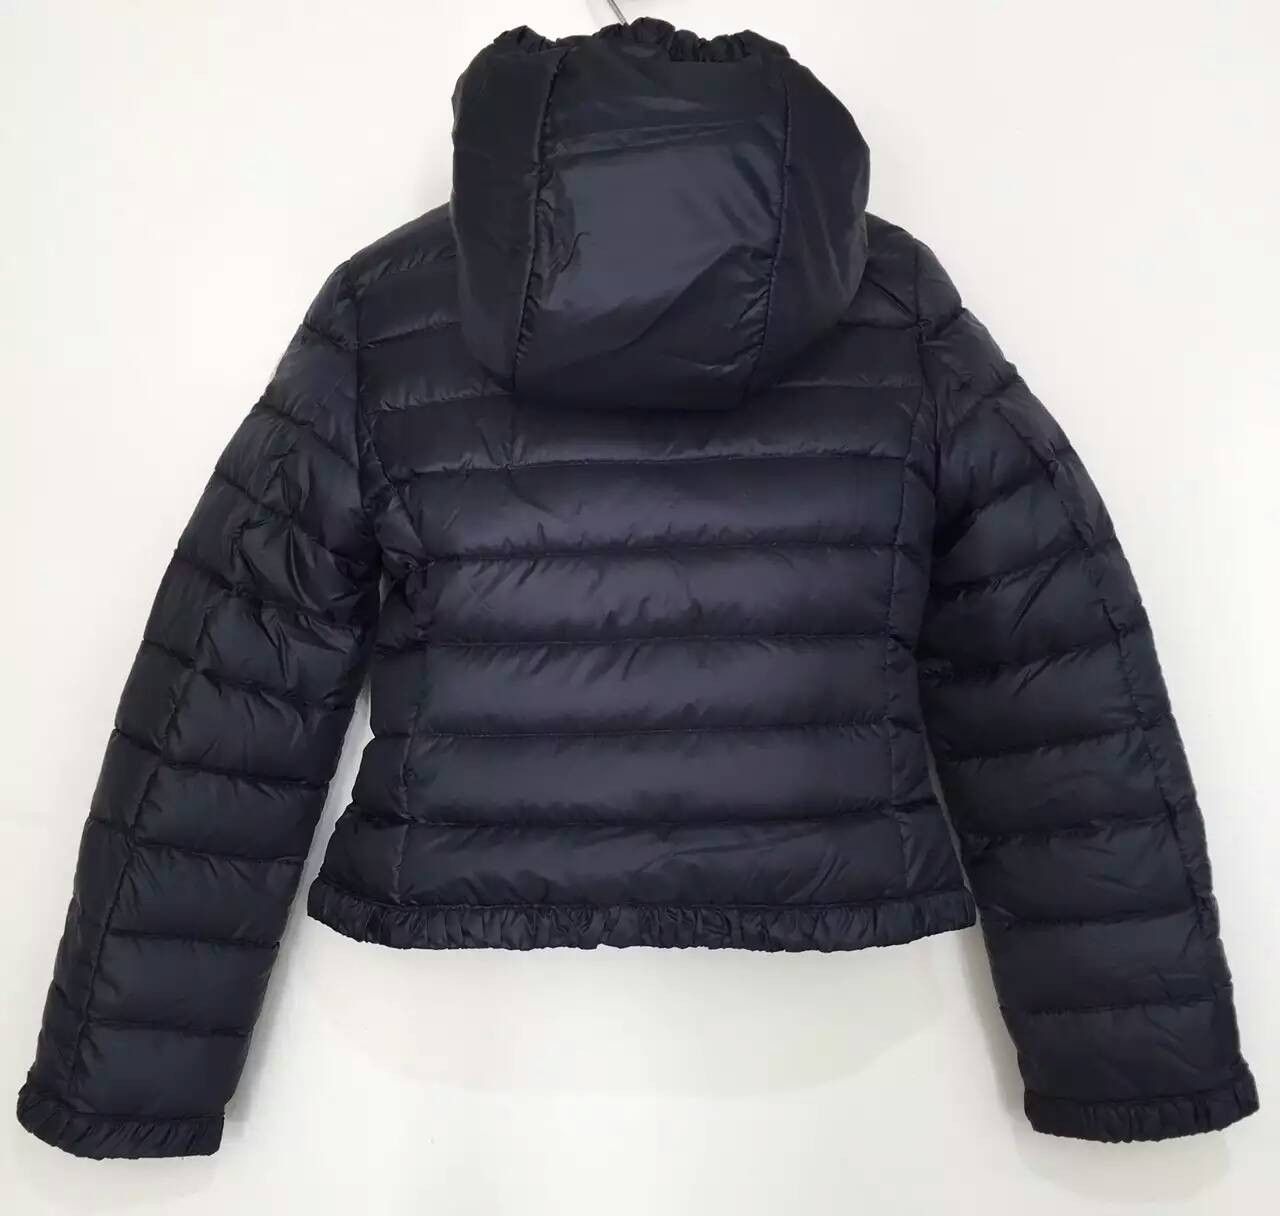 Girls Navy Blue Down Padded Hooded  'Flavienne' Jacket With Frilly Cuffs - CÉMAROSE | Children's Fashion Store - 2